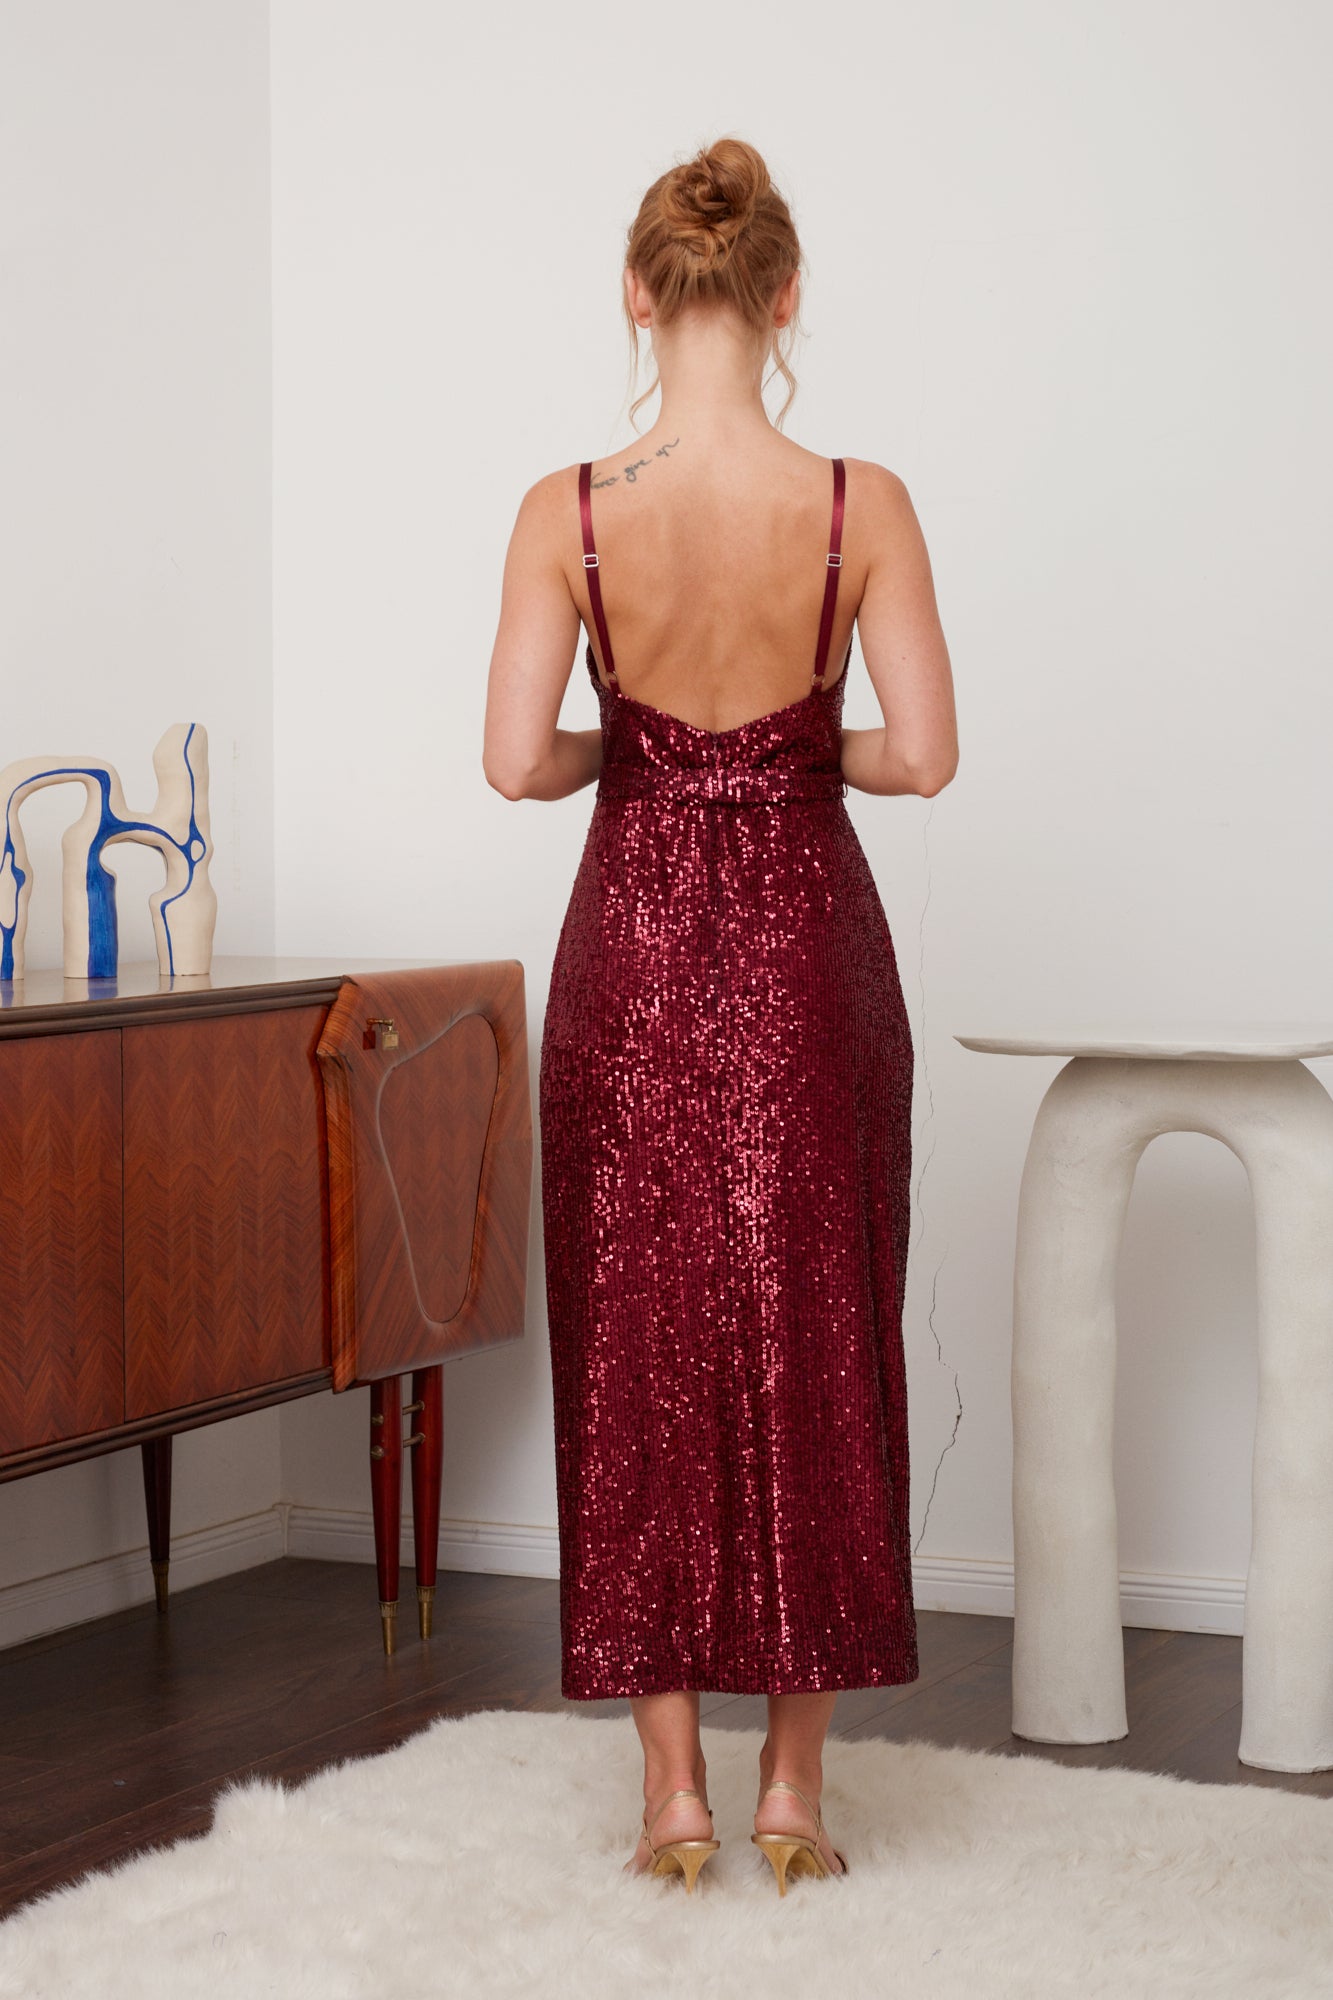 CHLOE Deep Red Sequin Open Back Cocktail Dress - Trendy and Fashionable